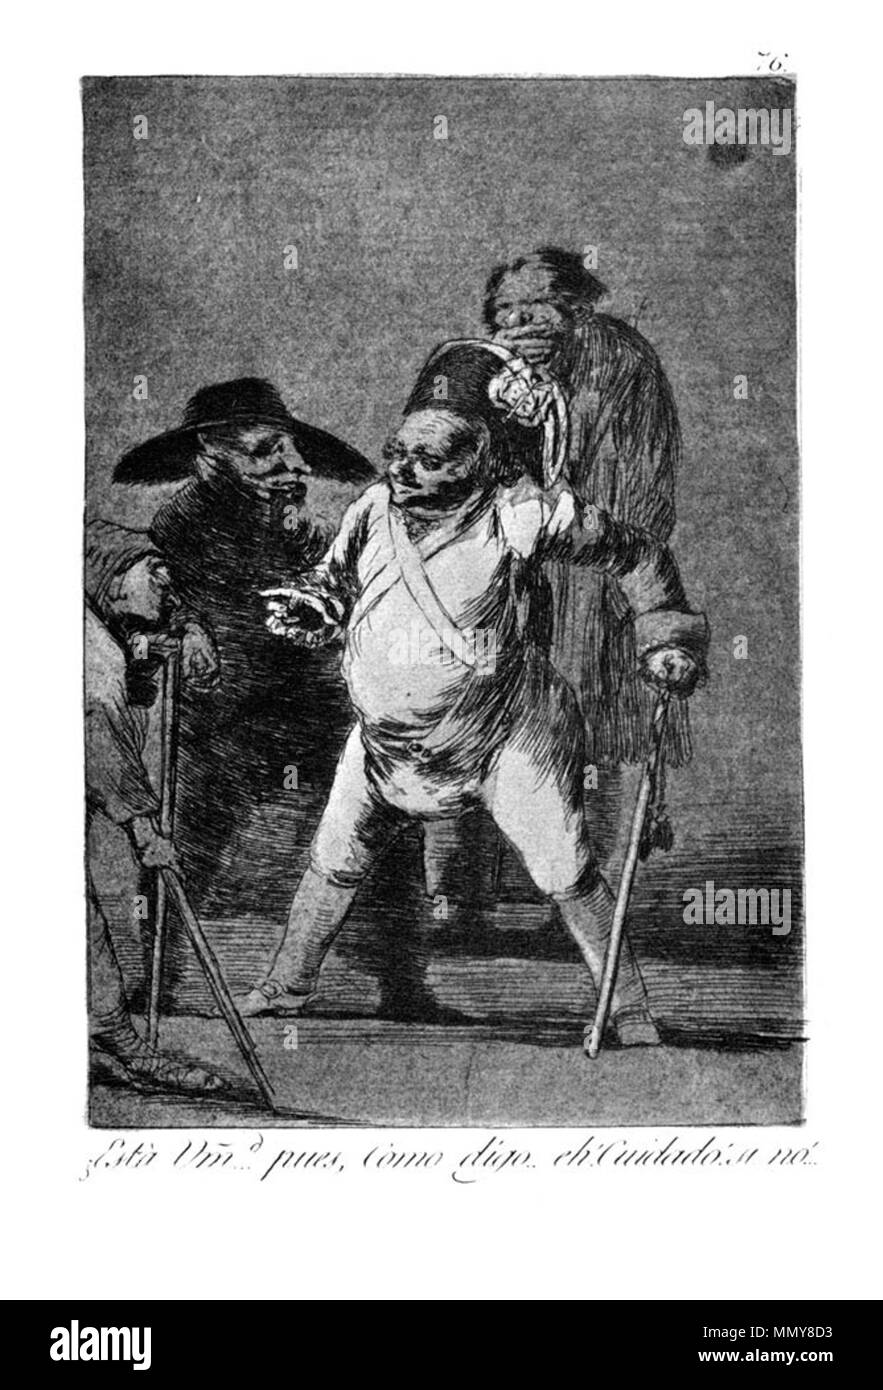 . Los Caprichos is a set of 80 aquatint prints created by Francisco Goya for release in 1799.  . 1799.   Francisco Goya  (1746–1828)      Alternative names Francisco Goya Lucientes, Francisco de Goya y Lucientes, Francisco José Goya Lucientes  Description Spanish painter, printmaker, lithographer, engraver and etcher  Date of birth/death 30 March 1746 16 April 1828  Location of birth/death Fuendetodos Bordeaux  Work location Madrid, Zaragoza, Bordeaux  Authority control  : Q5432 VIAF:?54343141 ISNI:?0000 0001 2280 1608 ULAN:?500118936 LCCN:?n79003363 NLA:?36545788 WorldCat Goya - Caprichos (76 Stock Photo